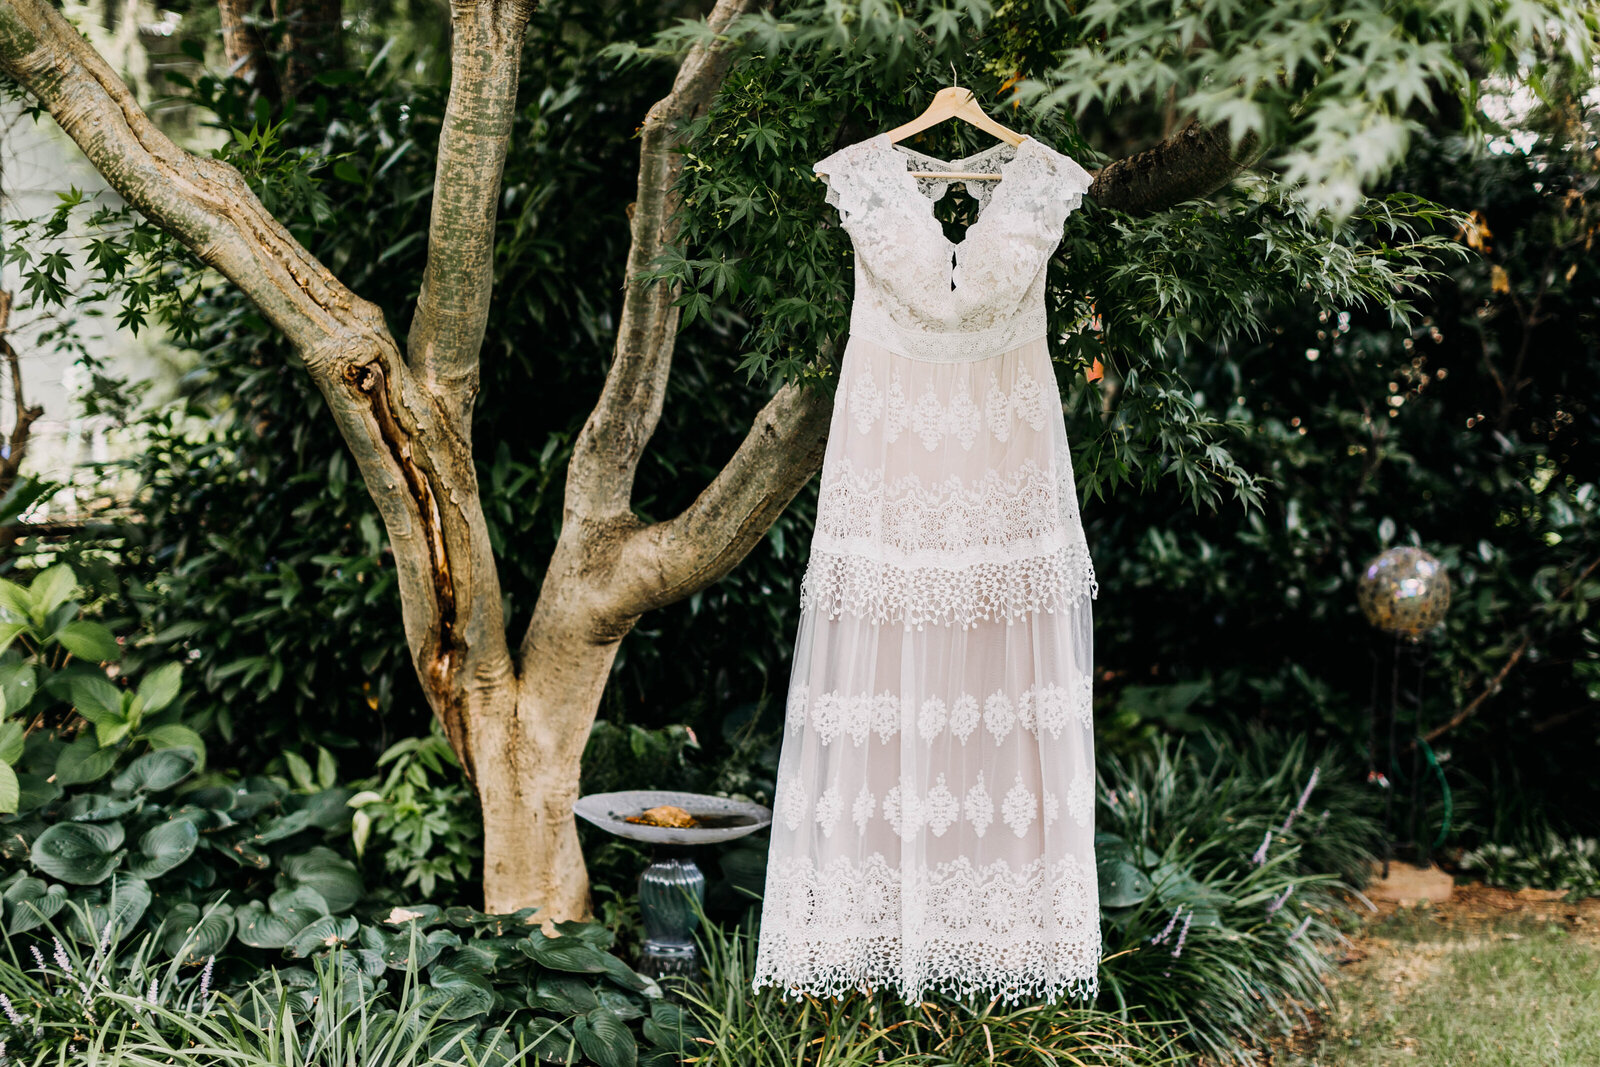 lace wedding dress hanging in tree